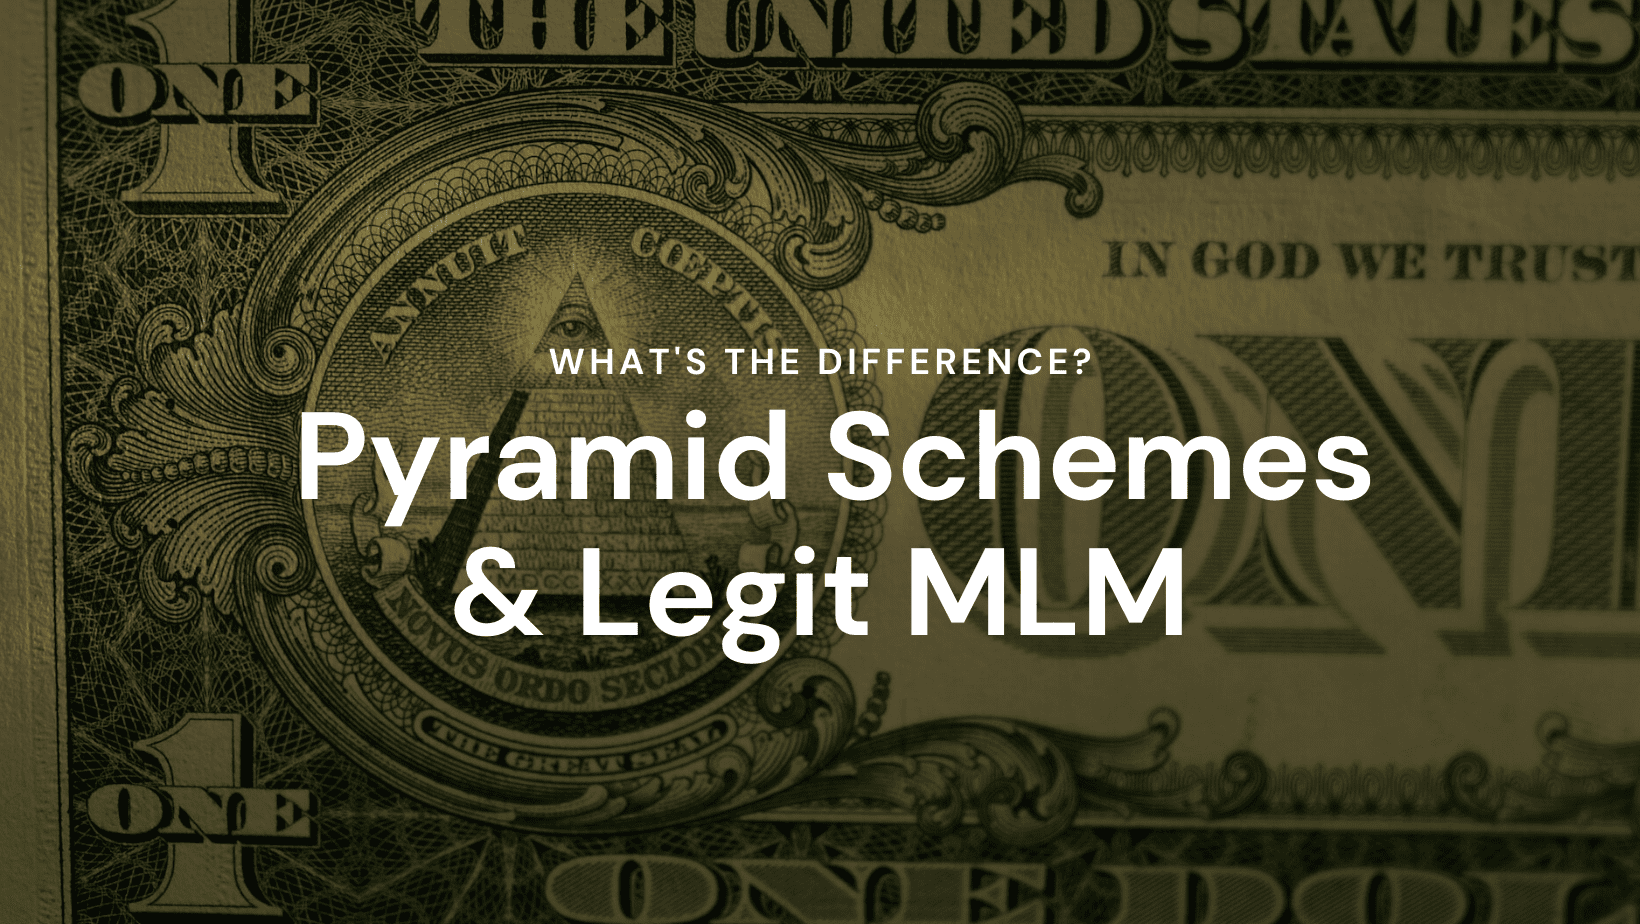 The Difference Between Pyramid Schemes and Legit MLM Businesses